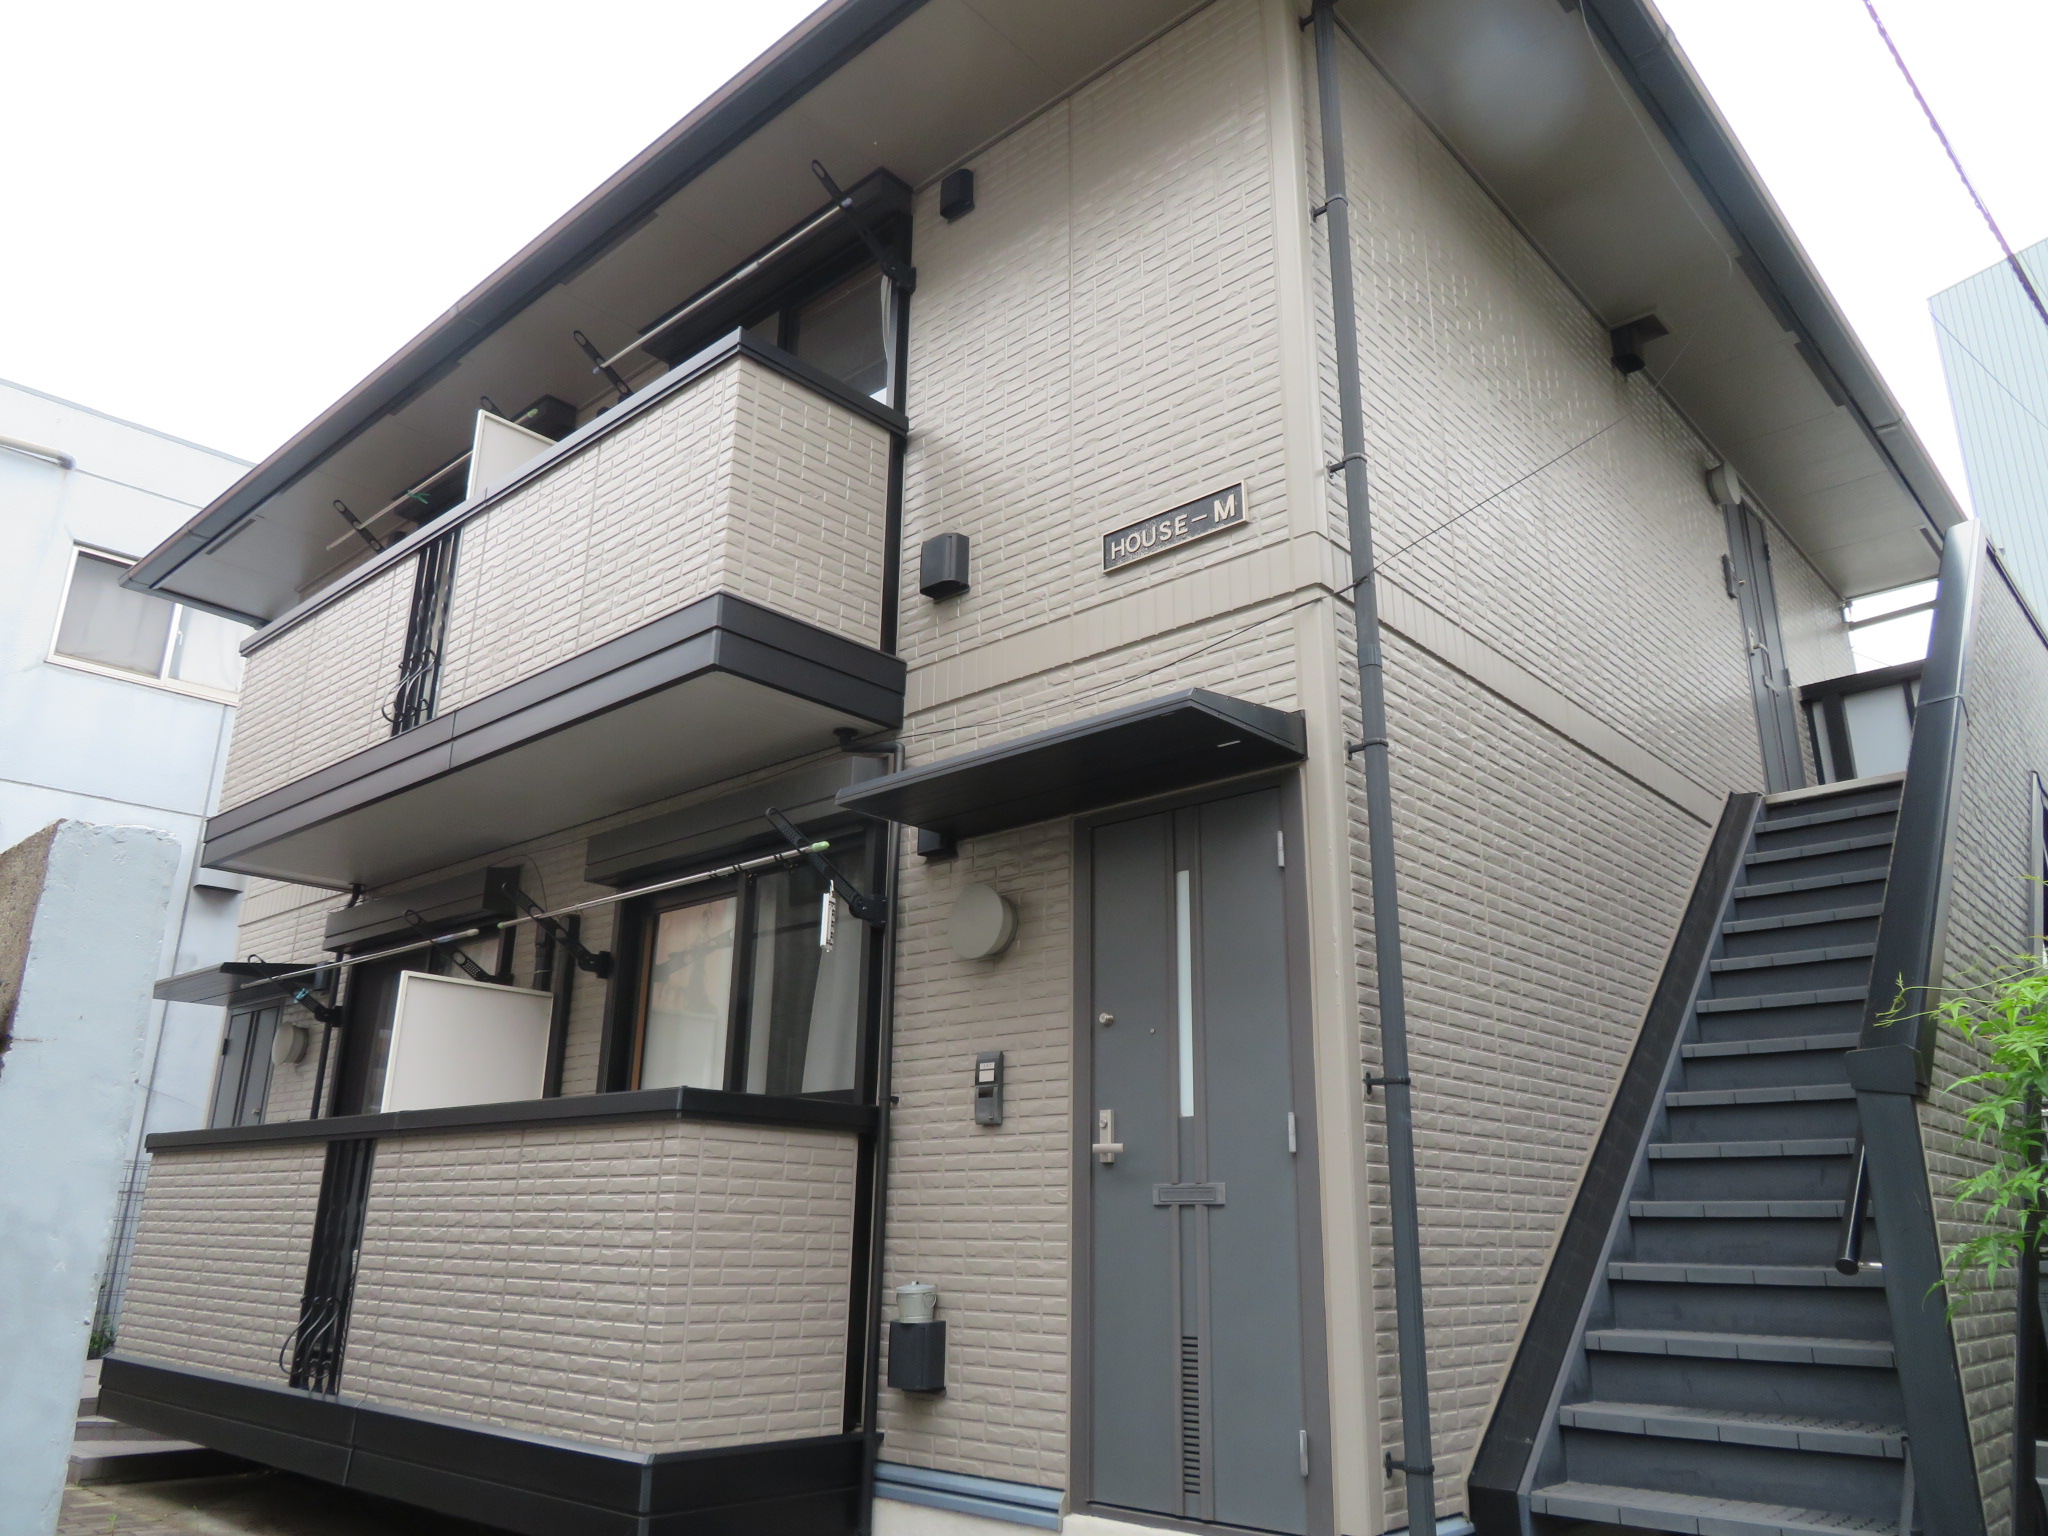 HOUSE-M202の室内2